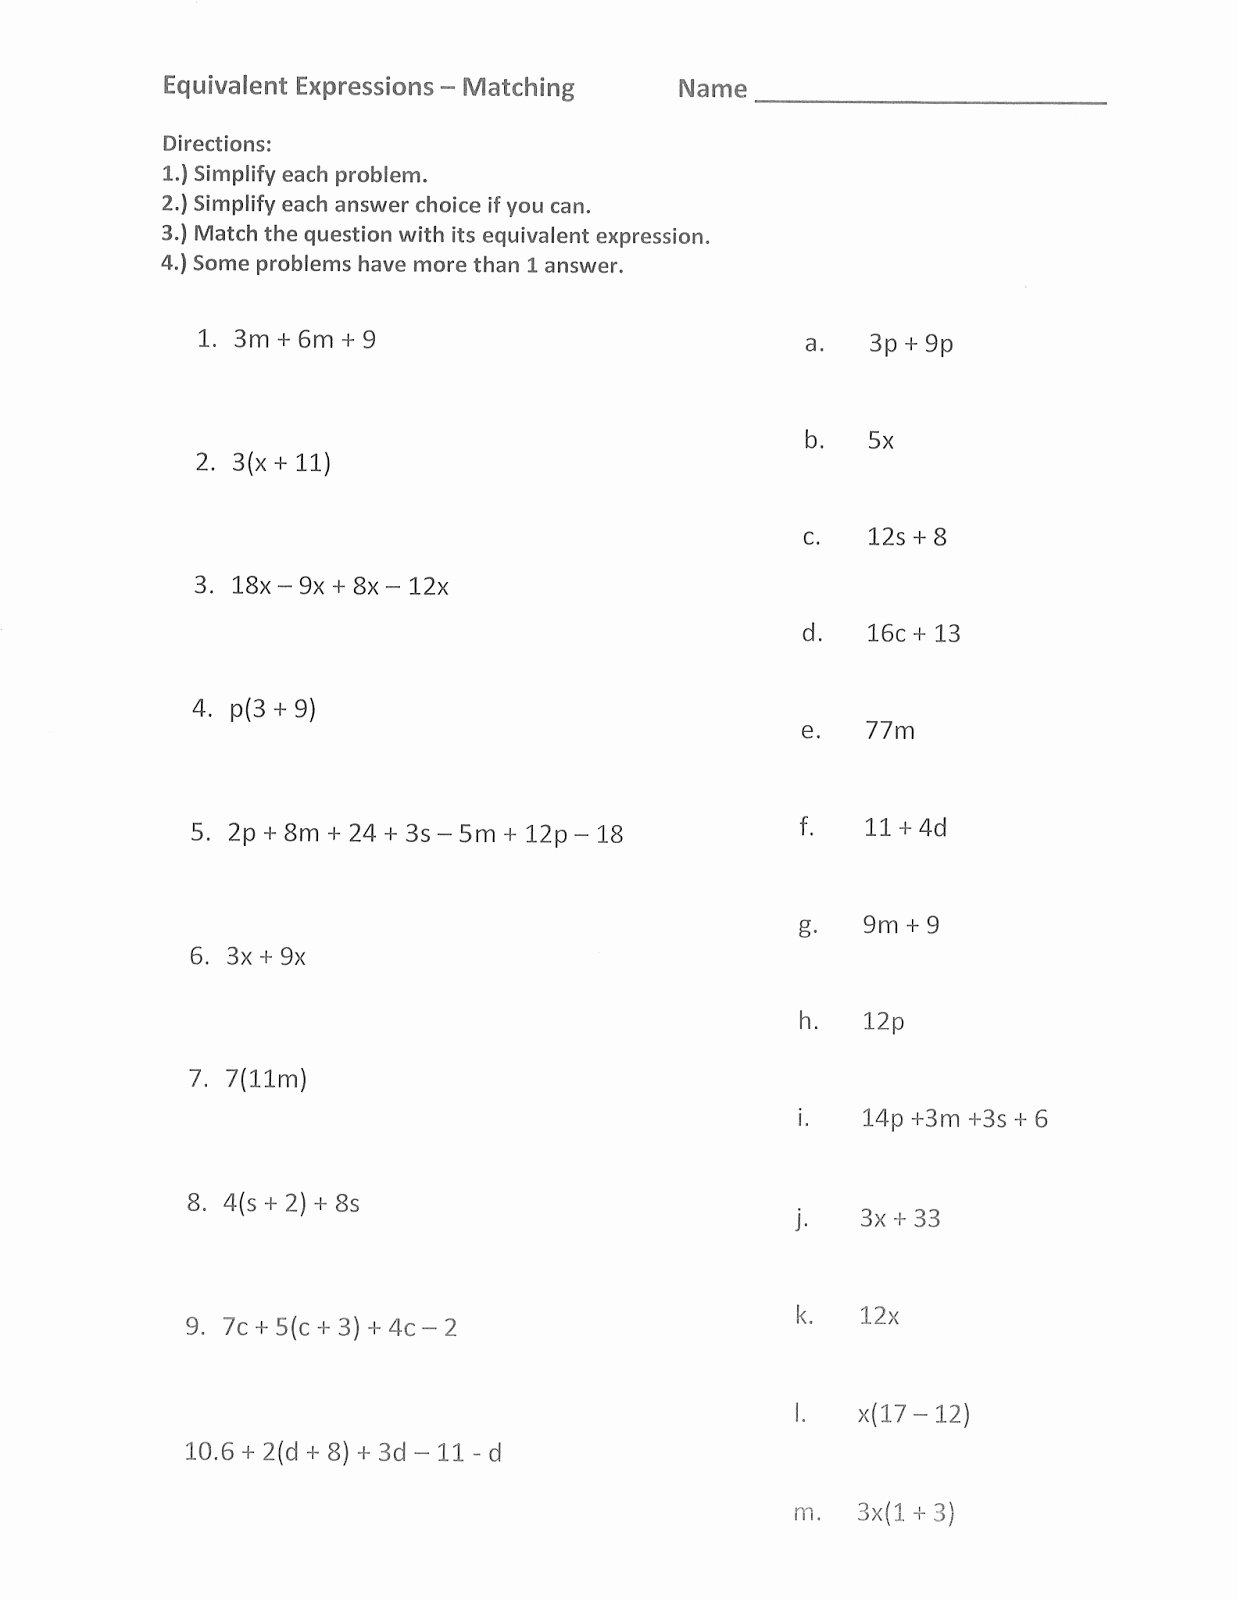 Equivalent Expressions Worksheet 6th Grade Inspirational Mrs White S 6th Grade Math Blog Equivalent Expressions